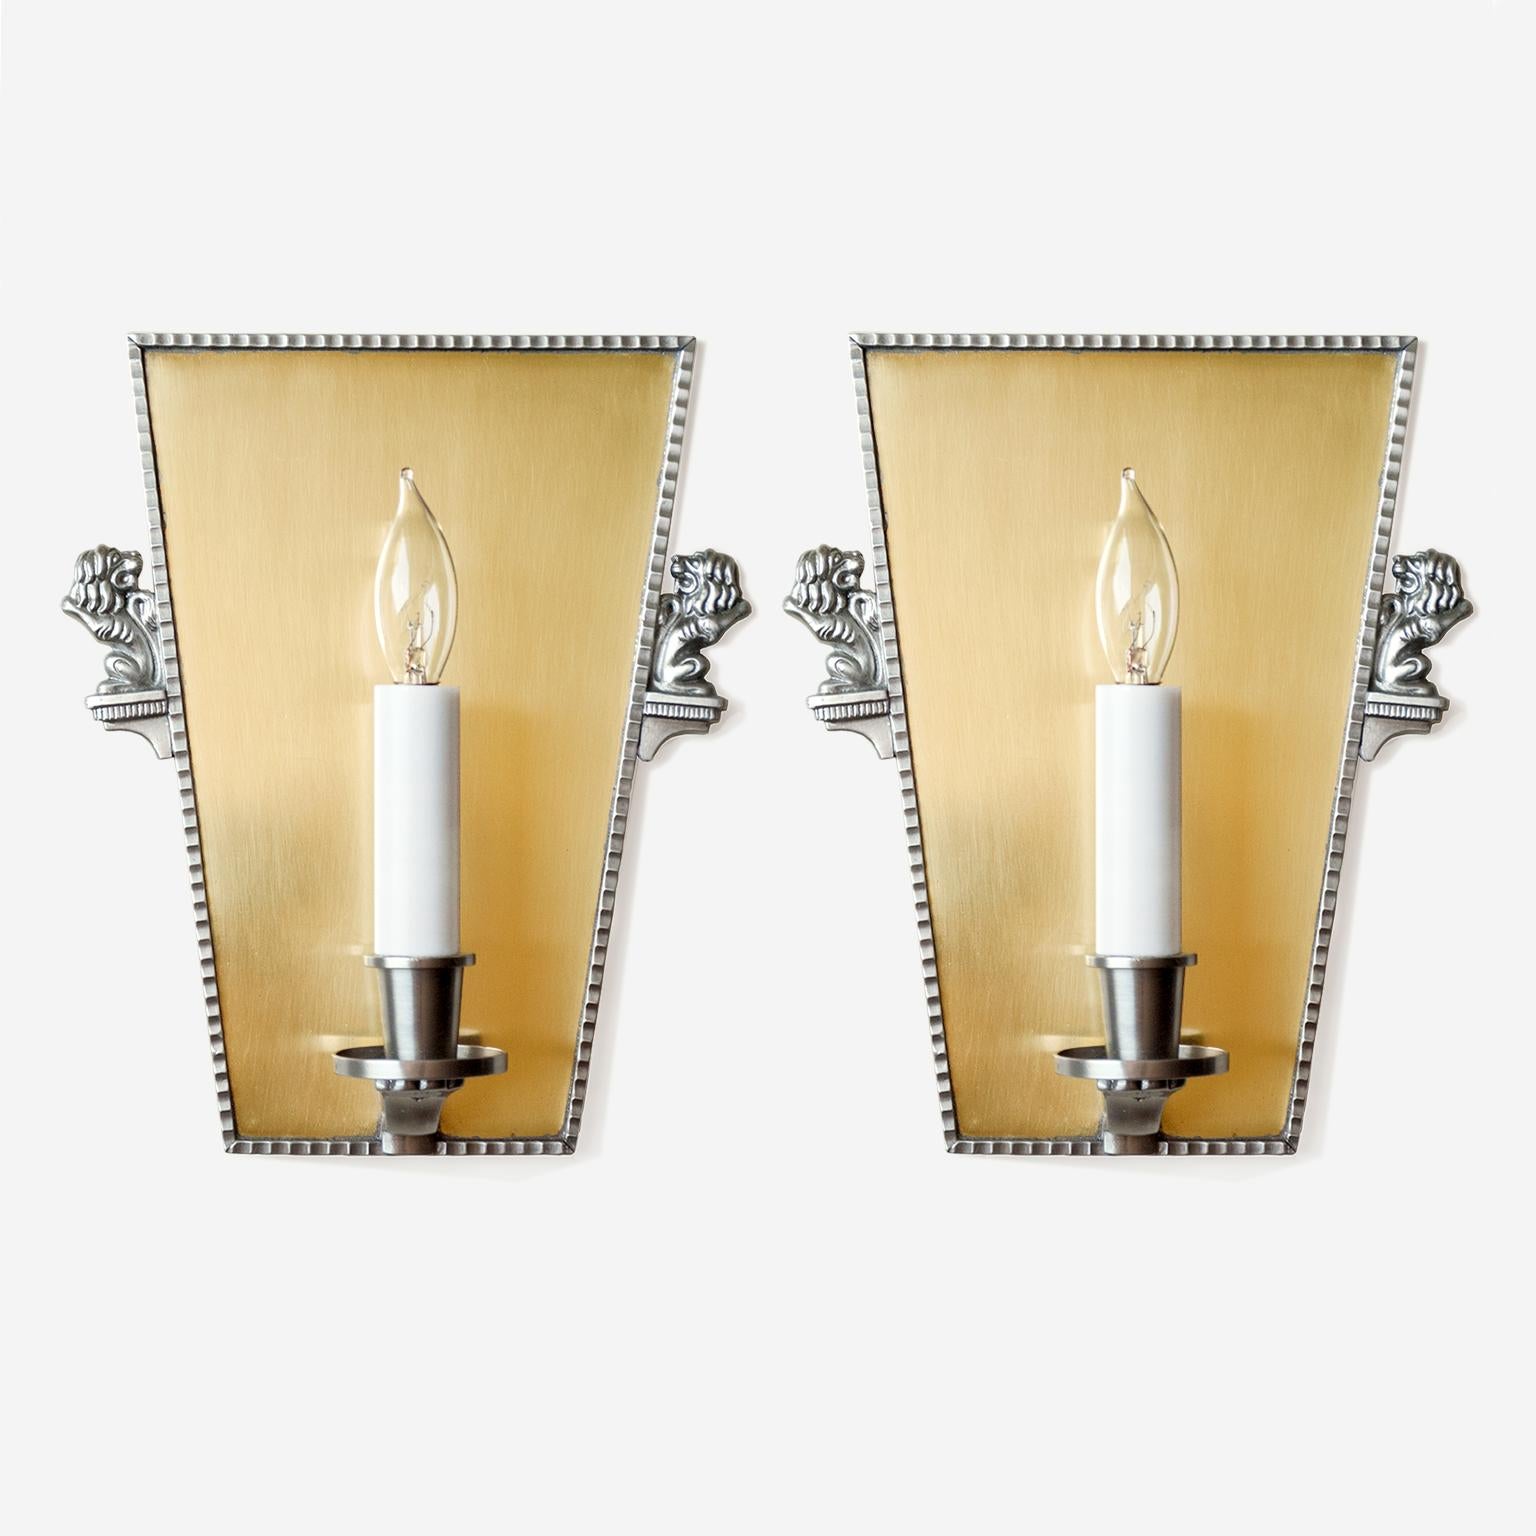 Scandinavian Modern keystone shaped pair of Swedish Art Deco wall sconces in polished brass with pewter details. The sconces each have a single candle with candelabra socket, a pewter detail frames the brass backplate and pewter opposing lions flank